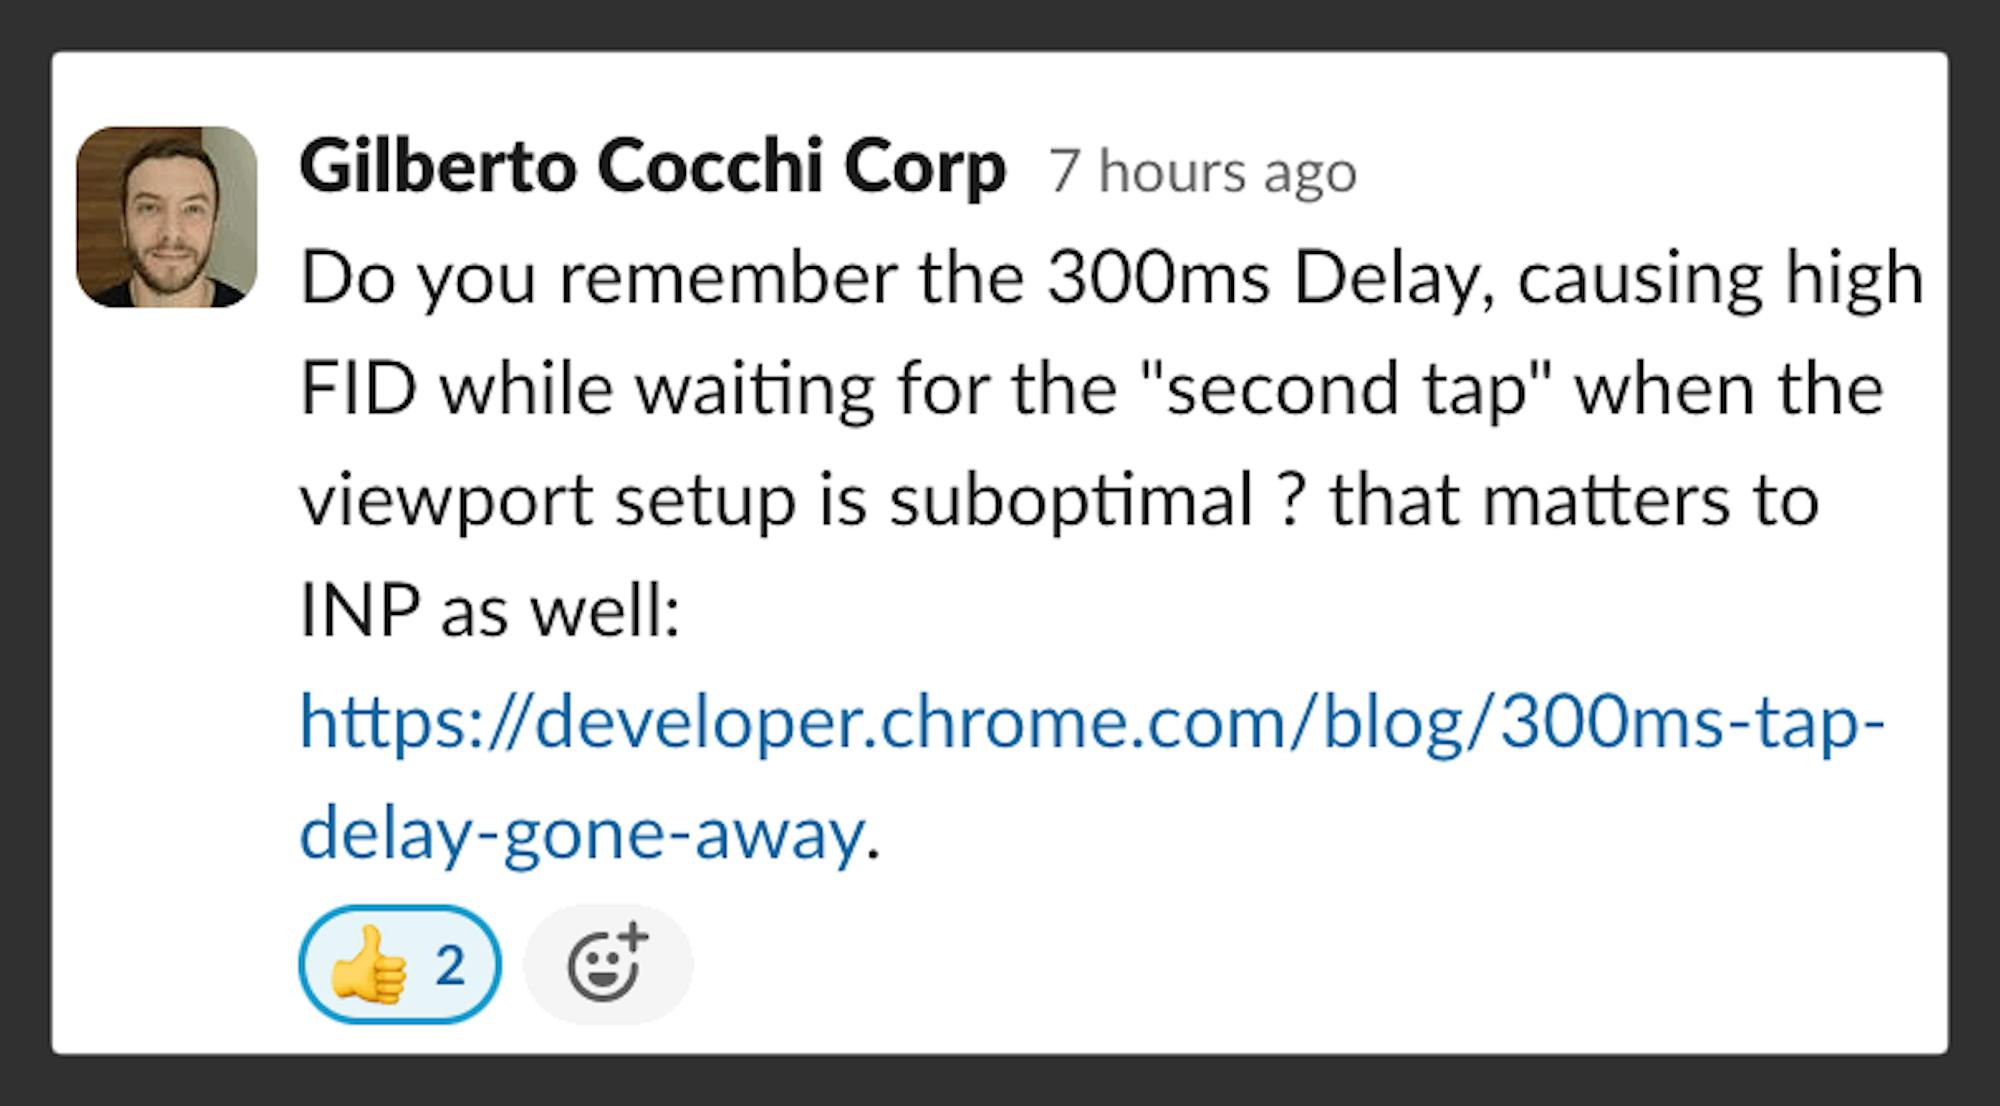 Slack thread discussing edge cases that can cause INP issues related to the double-tap delay.